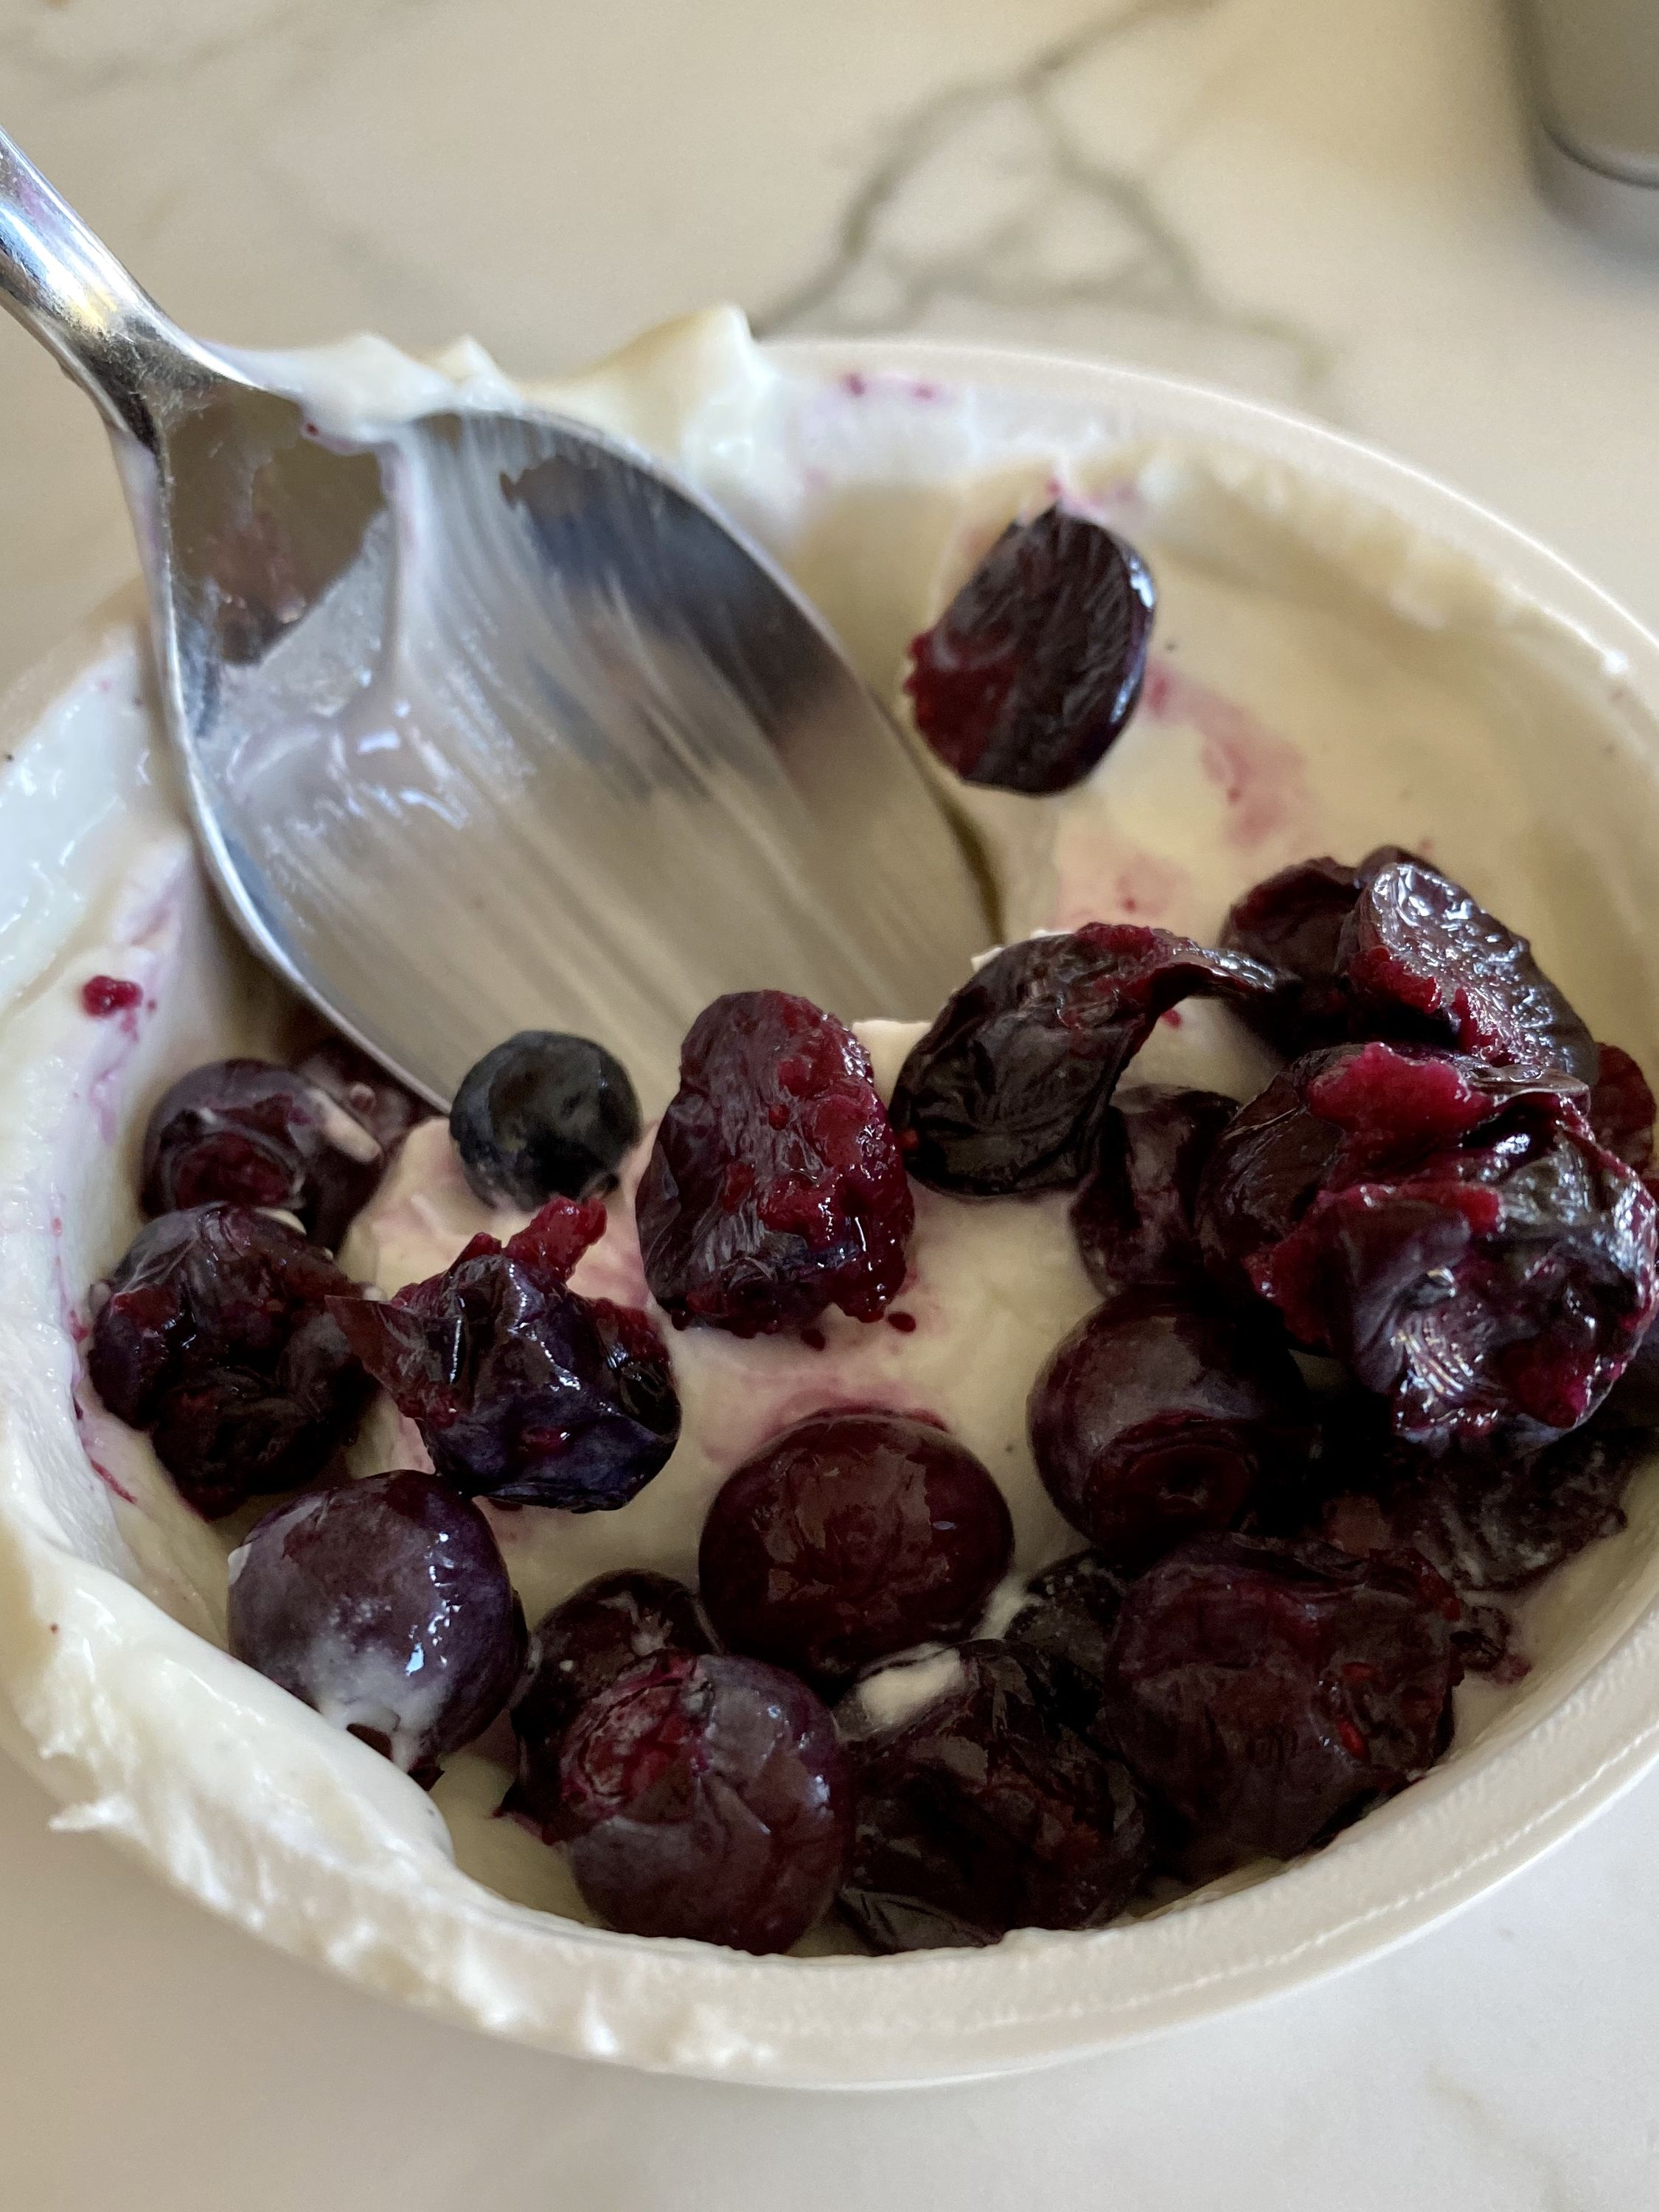 Yogurt with lacto-fermented blueberries on top